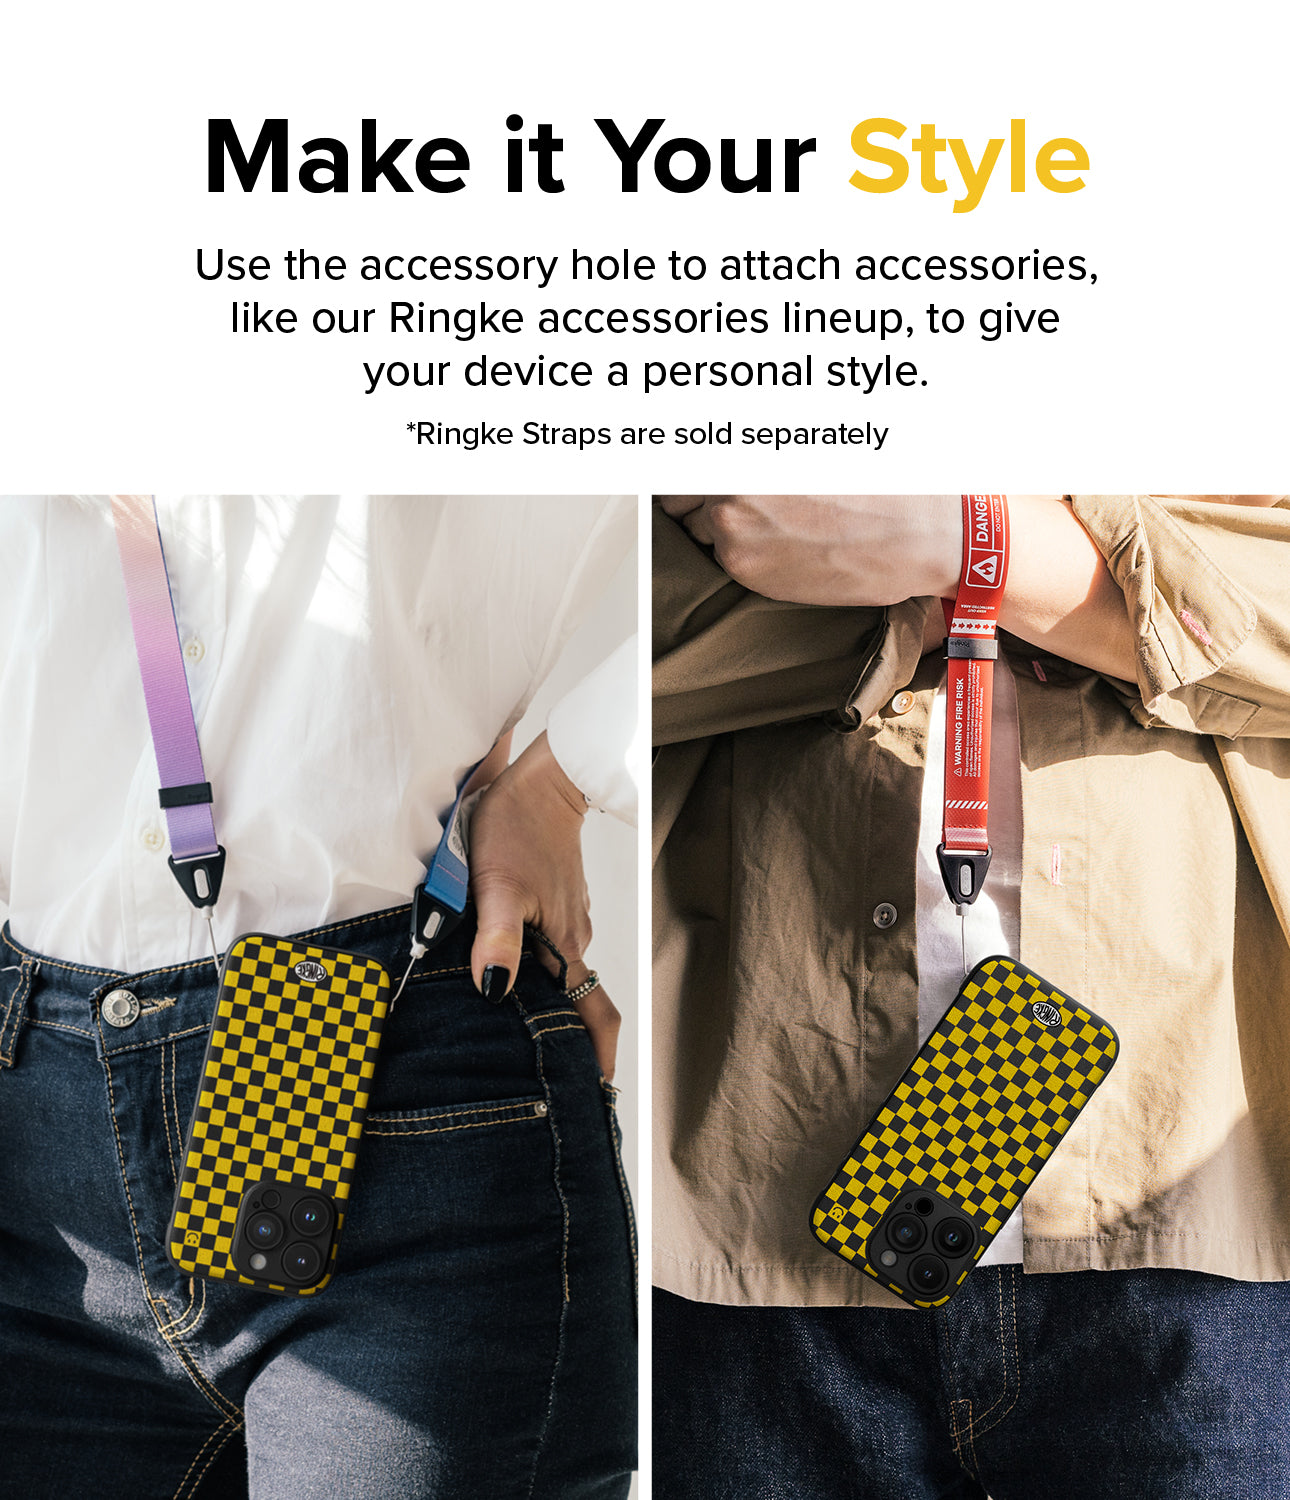 iPhone 15 Pro Case | Onyx Design - Checkerboard Yellow - Make it Your Style. Use the accessory hole to attach accessories, like our Ringke accessories lineup, to give your device a personal style.